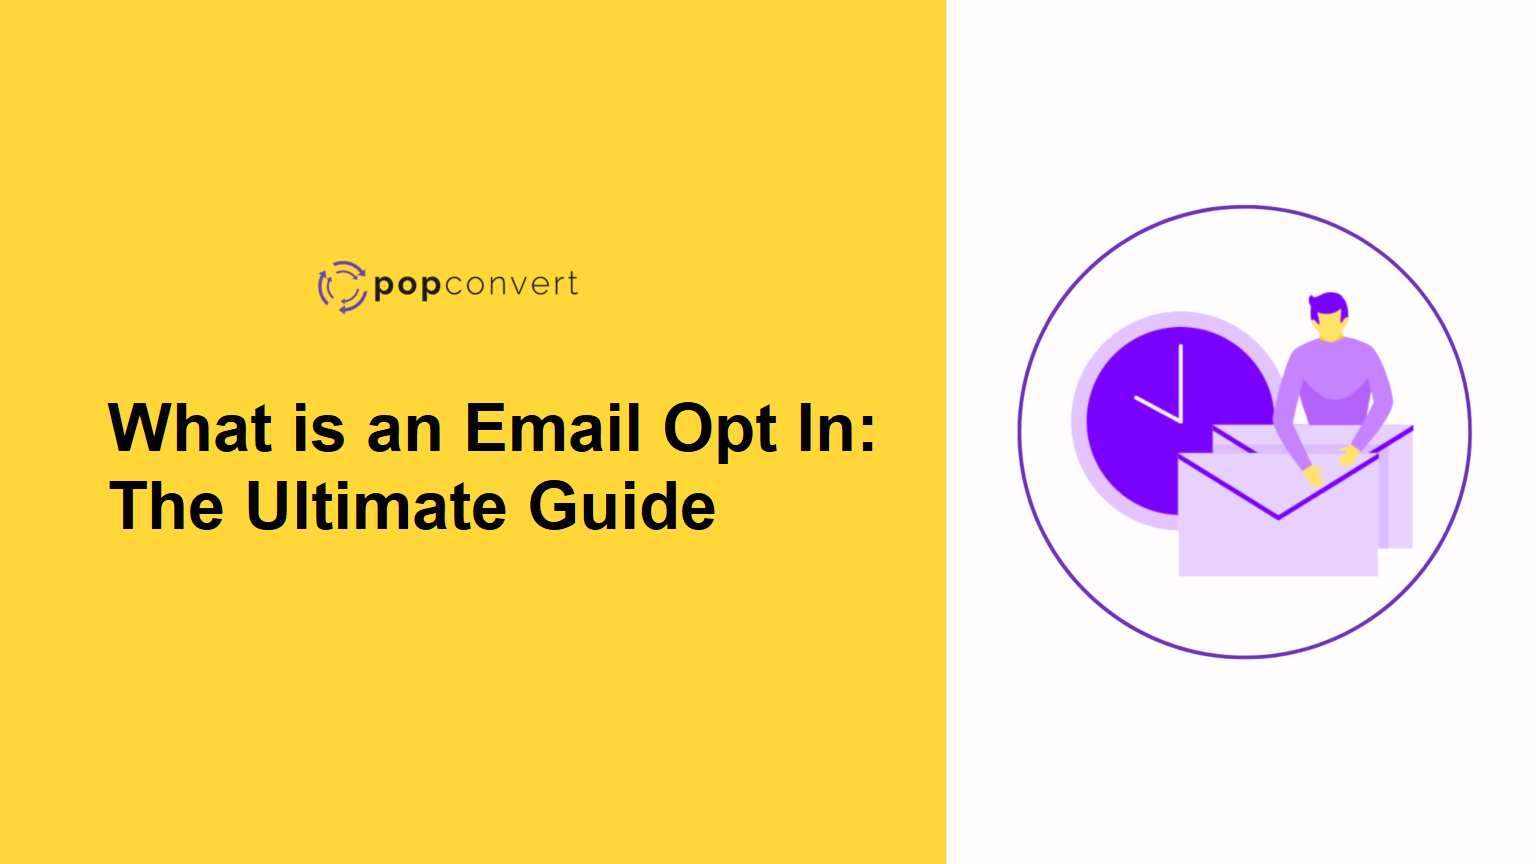 opt in: the ultimate guide